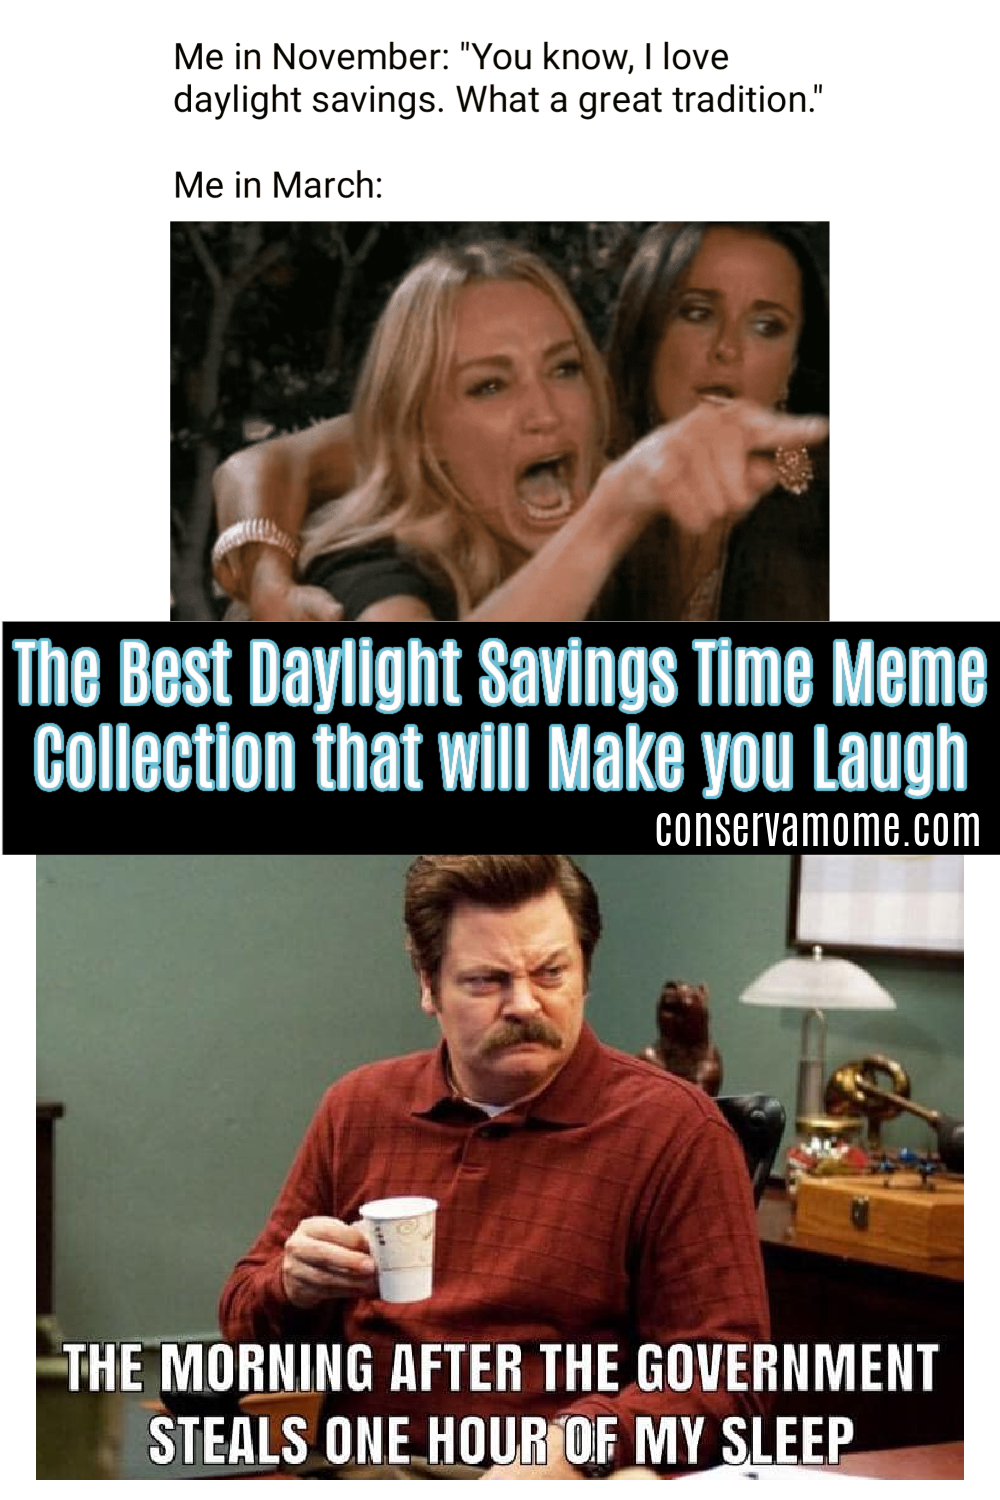 The Best Daylight Savings Time Meme Collection that will Make you Laugh